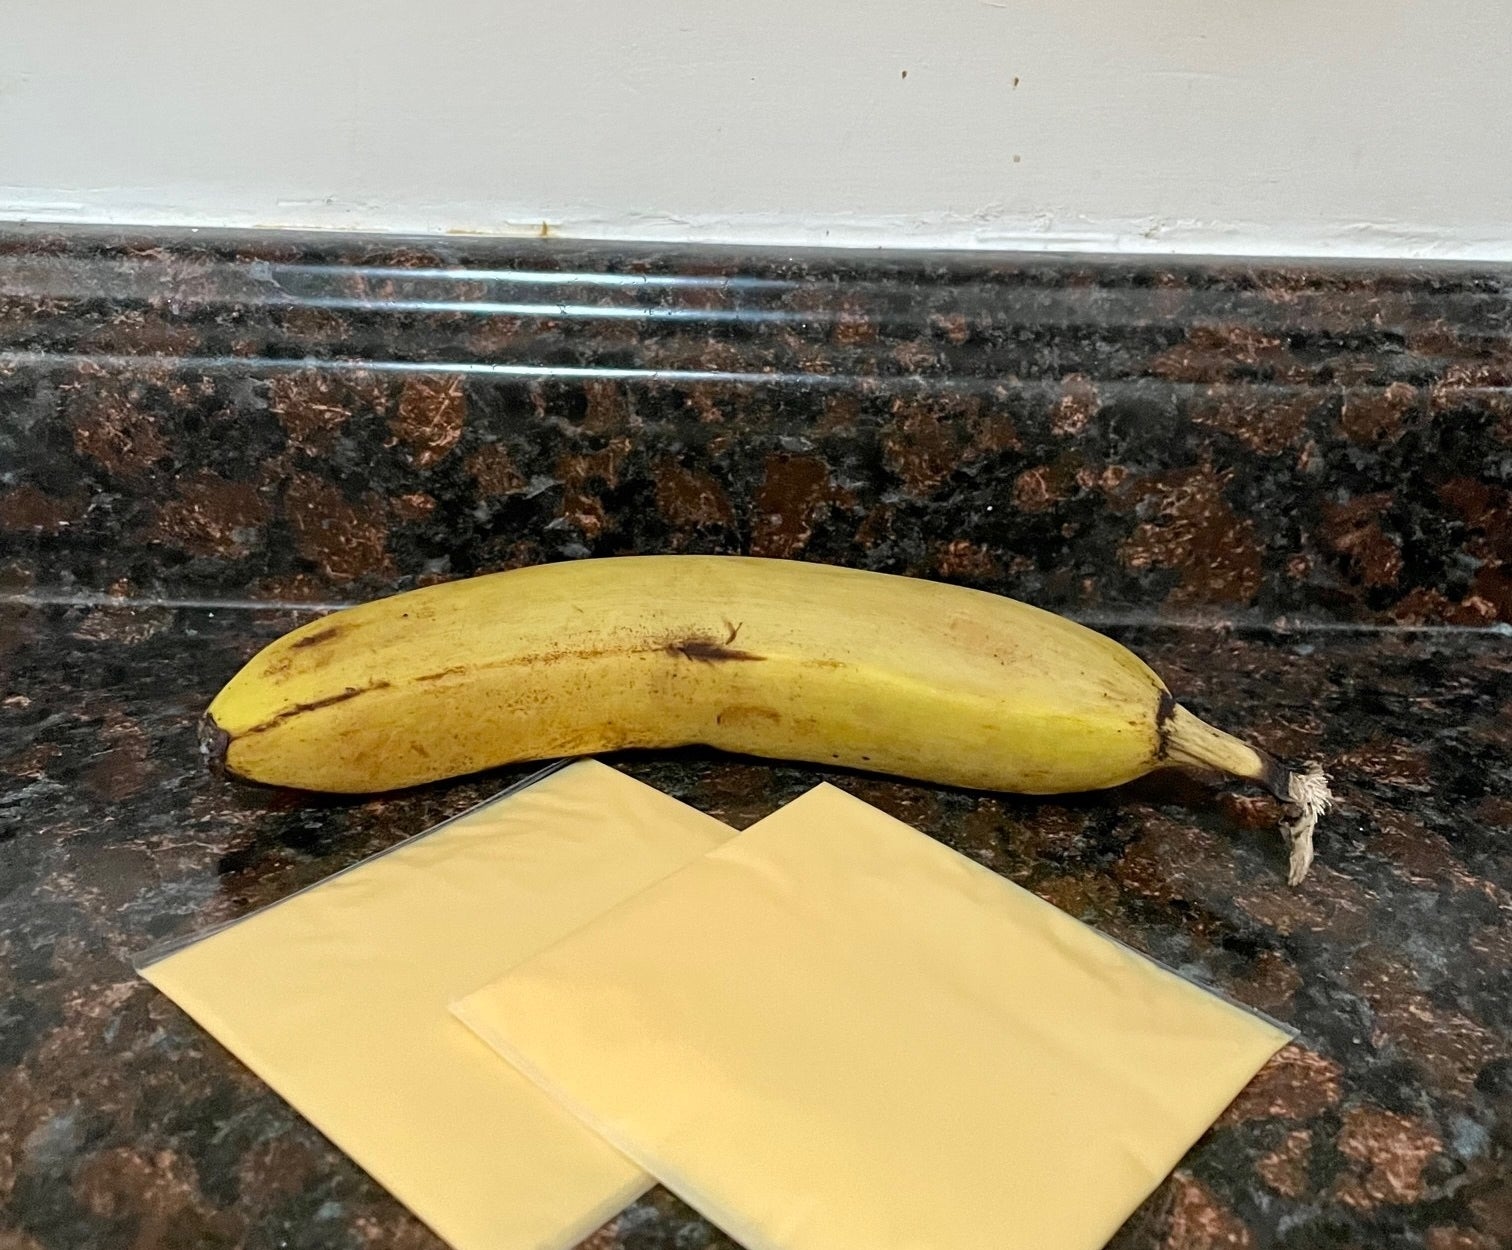 A banana and American cheese slices